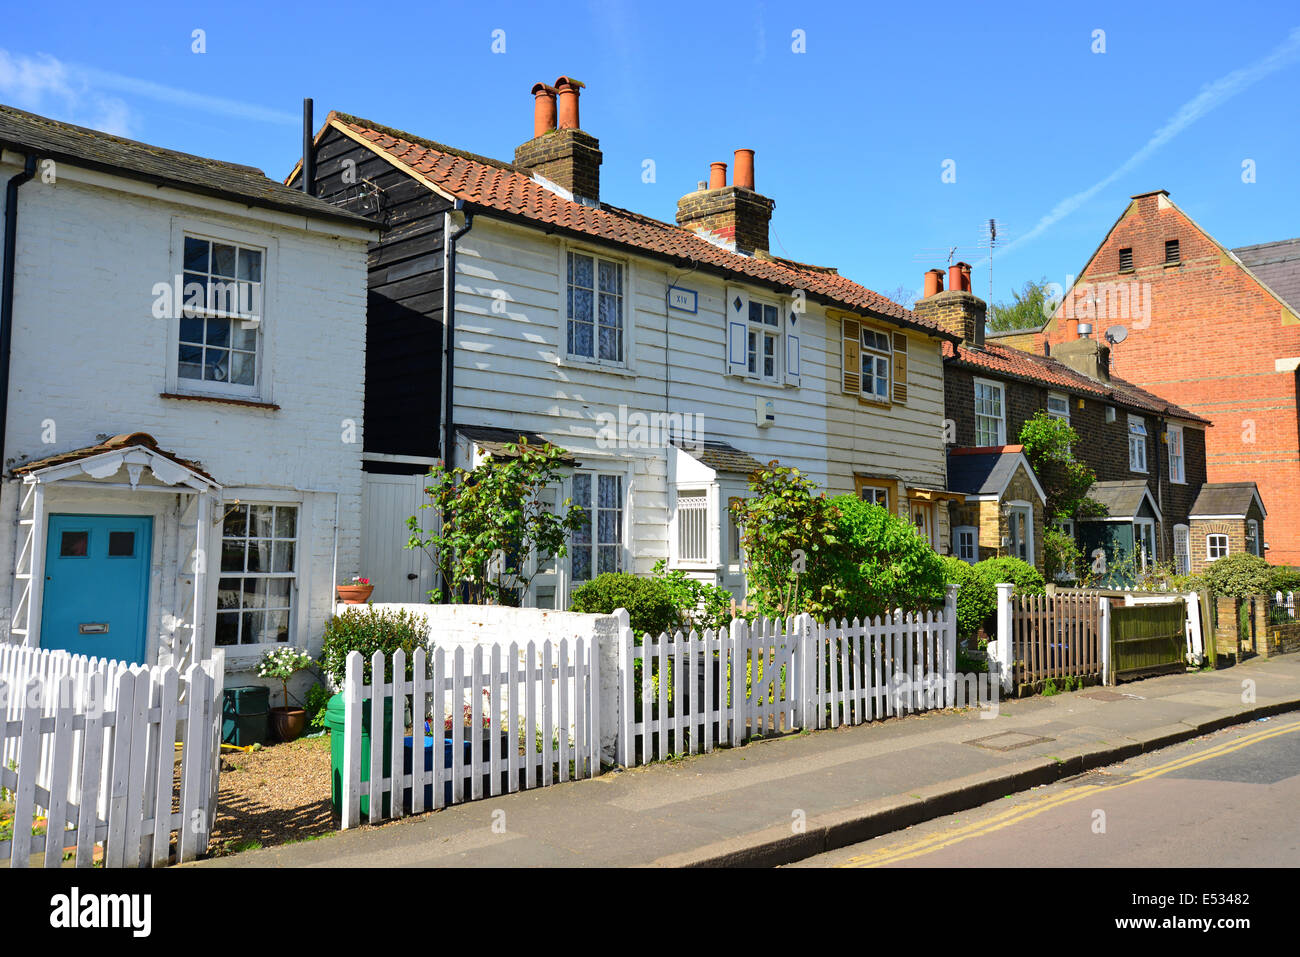 Period cottages on The Green, Twickenham, London Borough of Richmond upon Thames, Greater London, England, United Kingdom Stock Photo